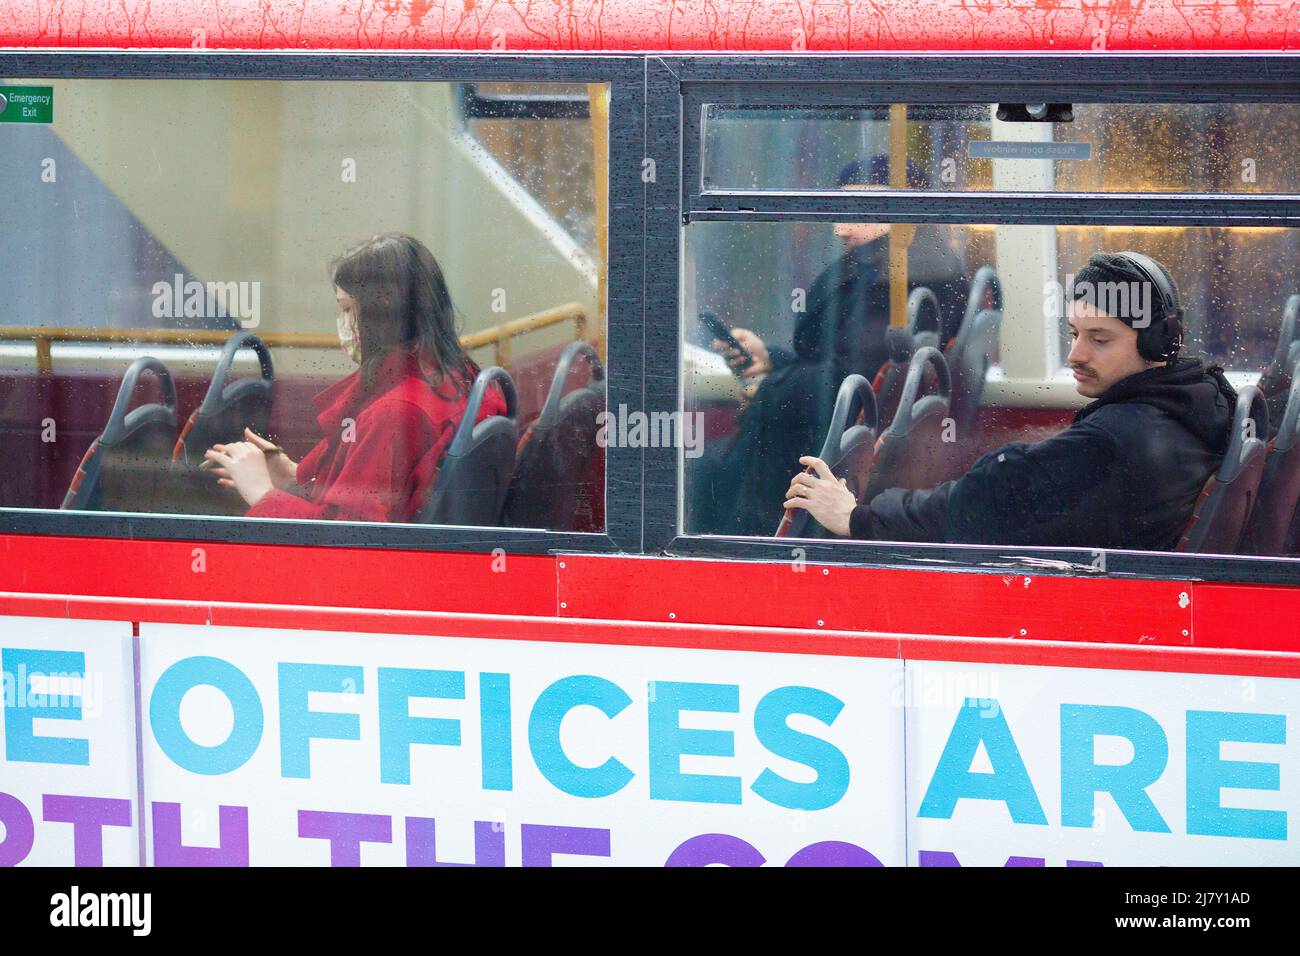 Passengers, some wearing a mask and others not, are seen in a double-decker bus in the City of London. Stock Photo